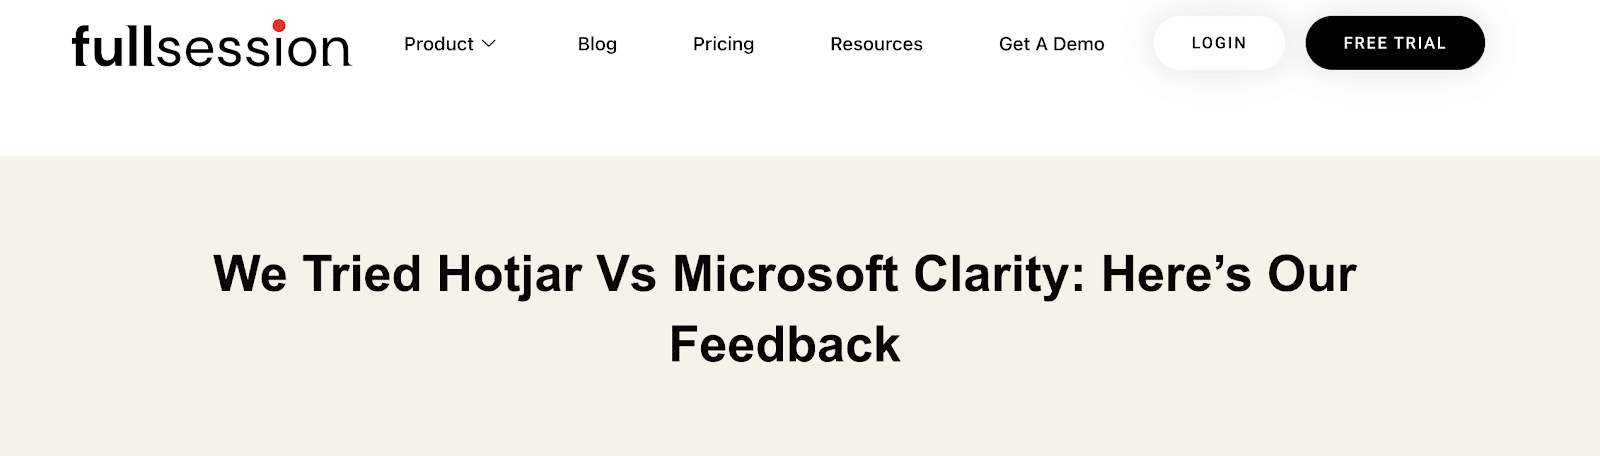 Quoleady's client blog topic: We tried Hotjar vs Microsoft Clarity